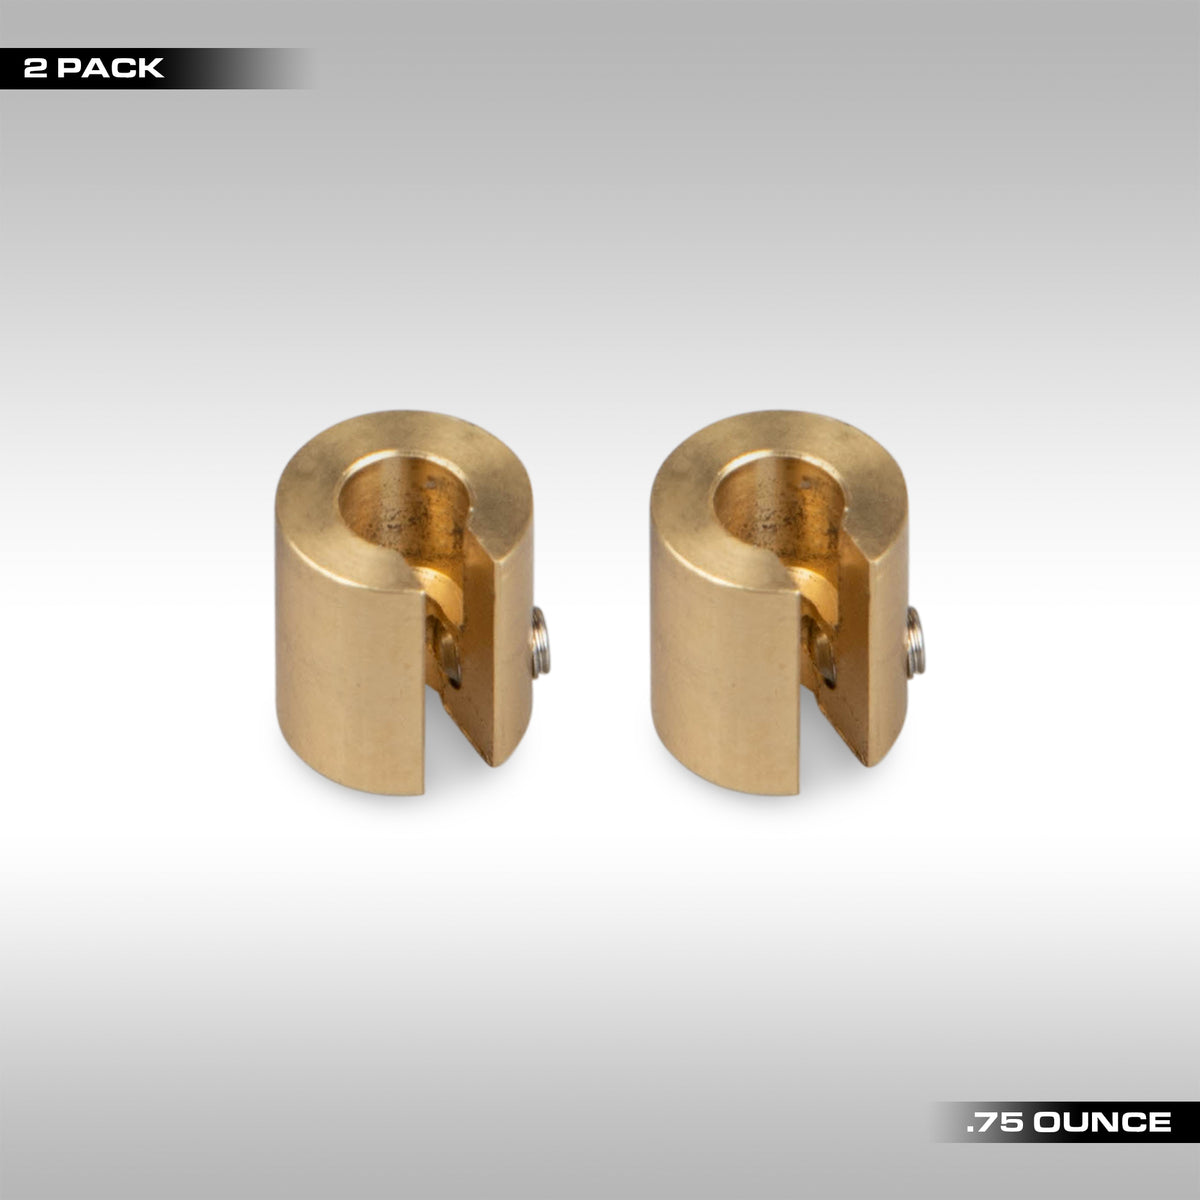 2 pack .75 ounce No-Mar wheel weights for balancing your motorcycle wheels. Machined brass weights are designed to lock onto the spokes with a set screw letting you get the perfect balance for your wheels. No Mar motorcycle wheel weights.